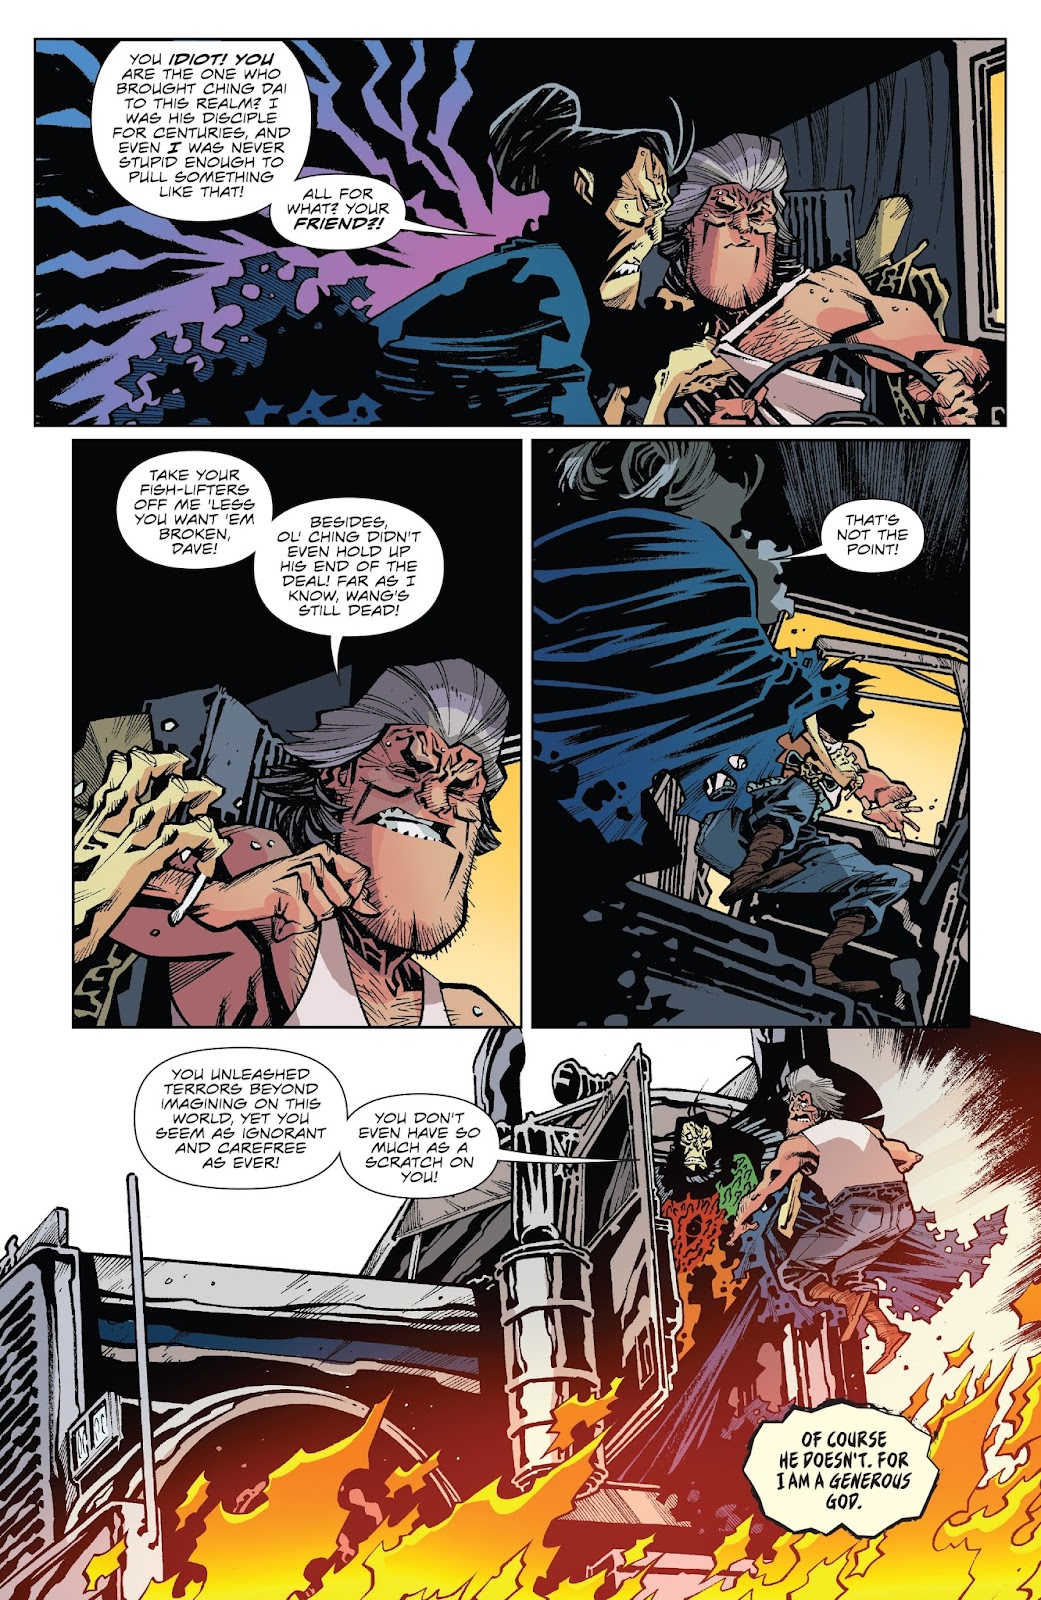 Big Trouble in Little China: Old Man Jack issue 3 - Page 21